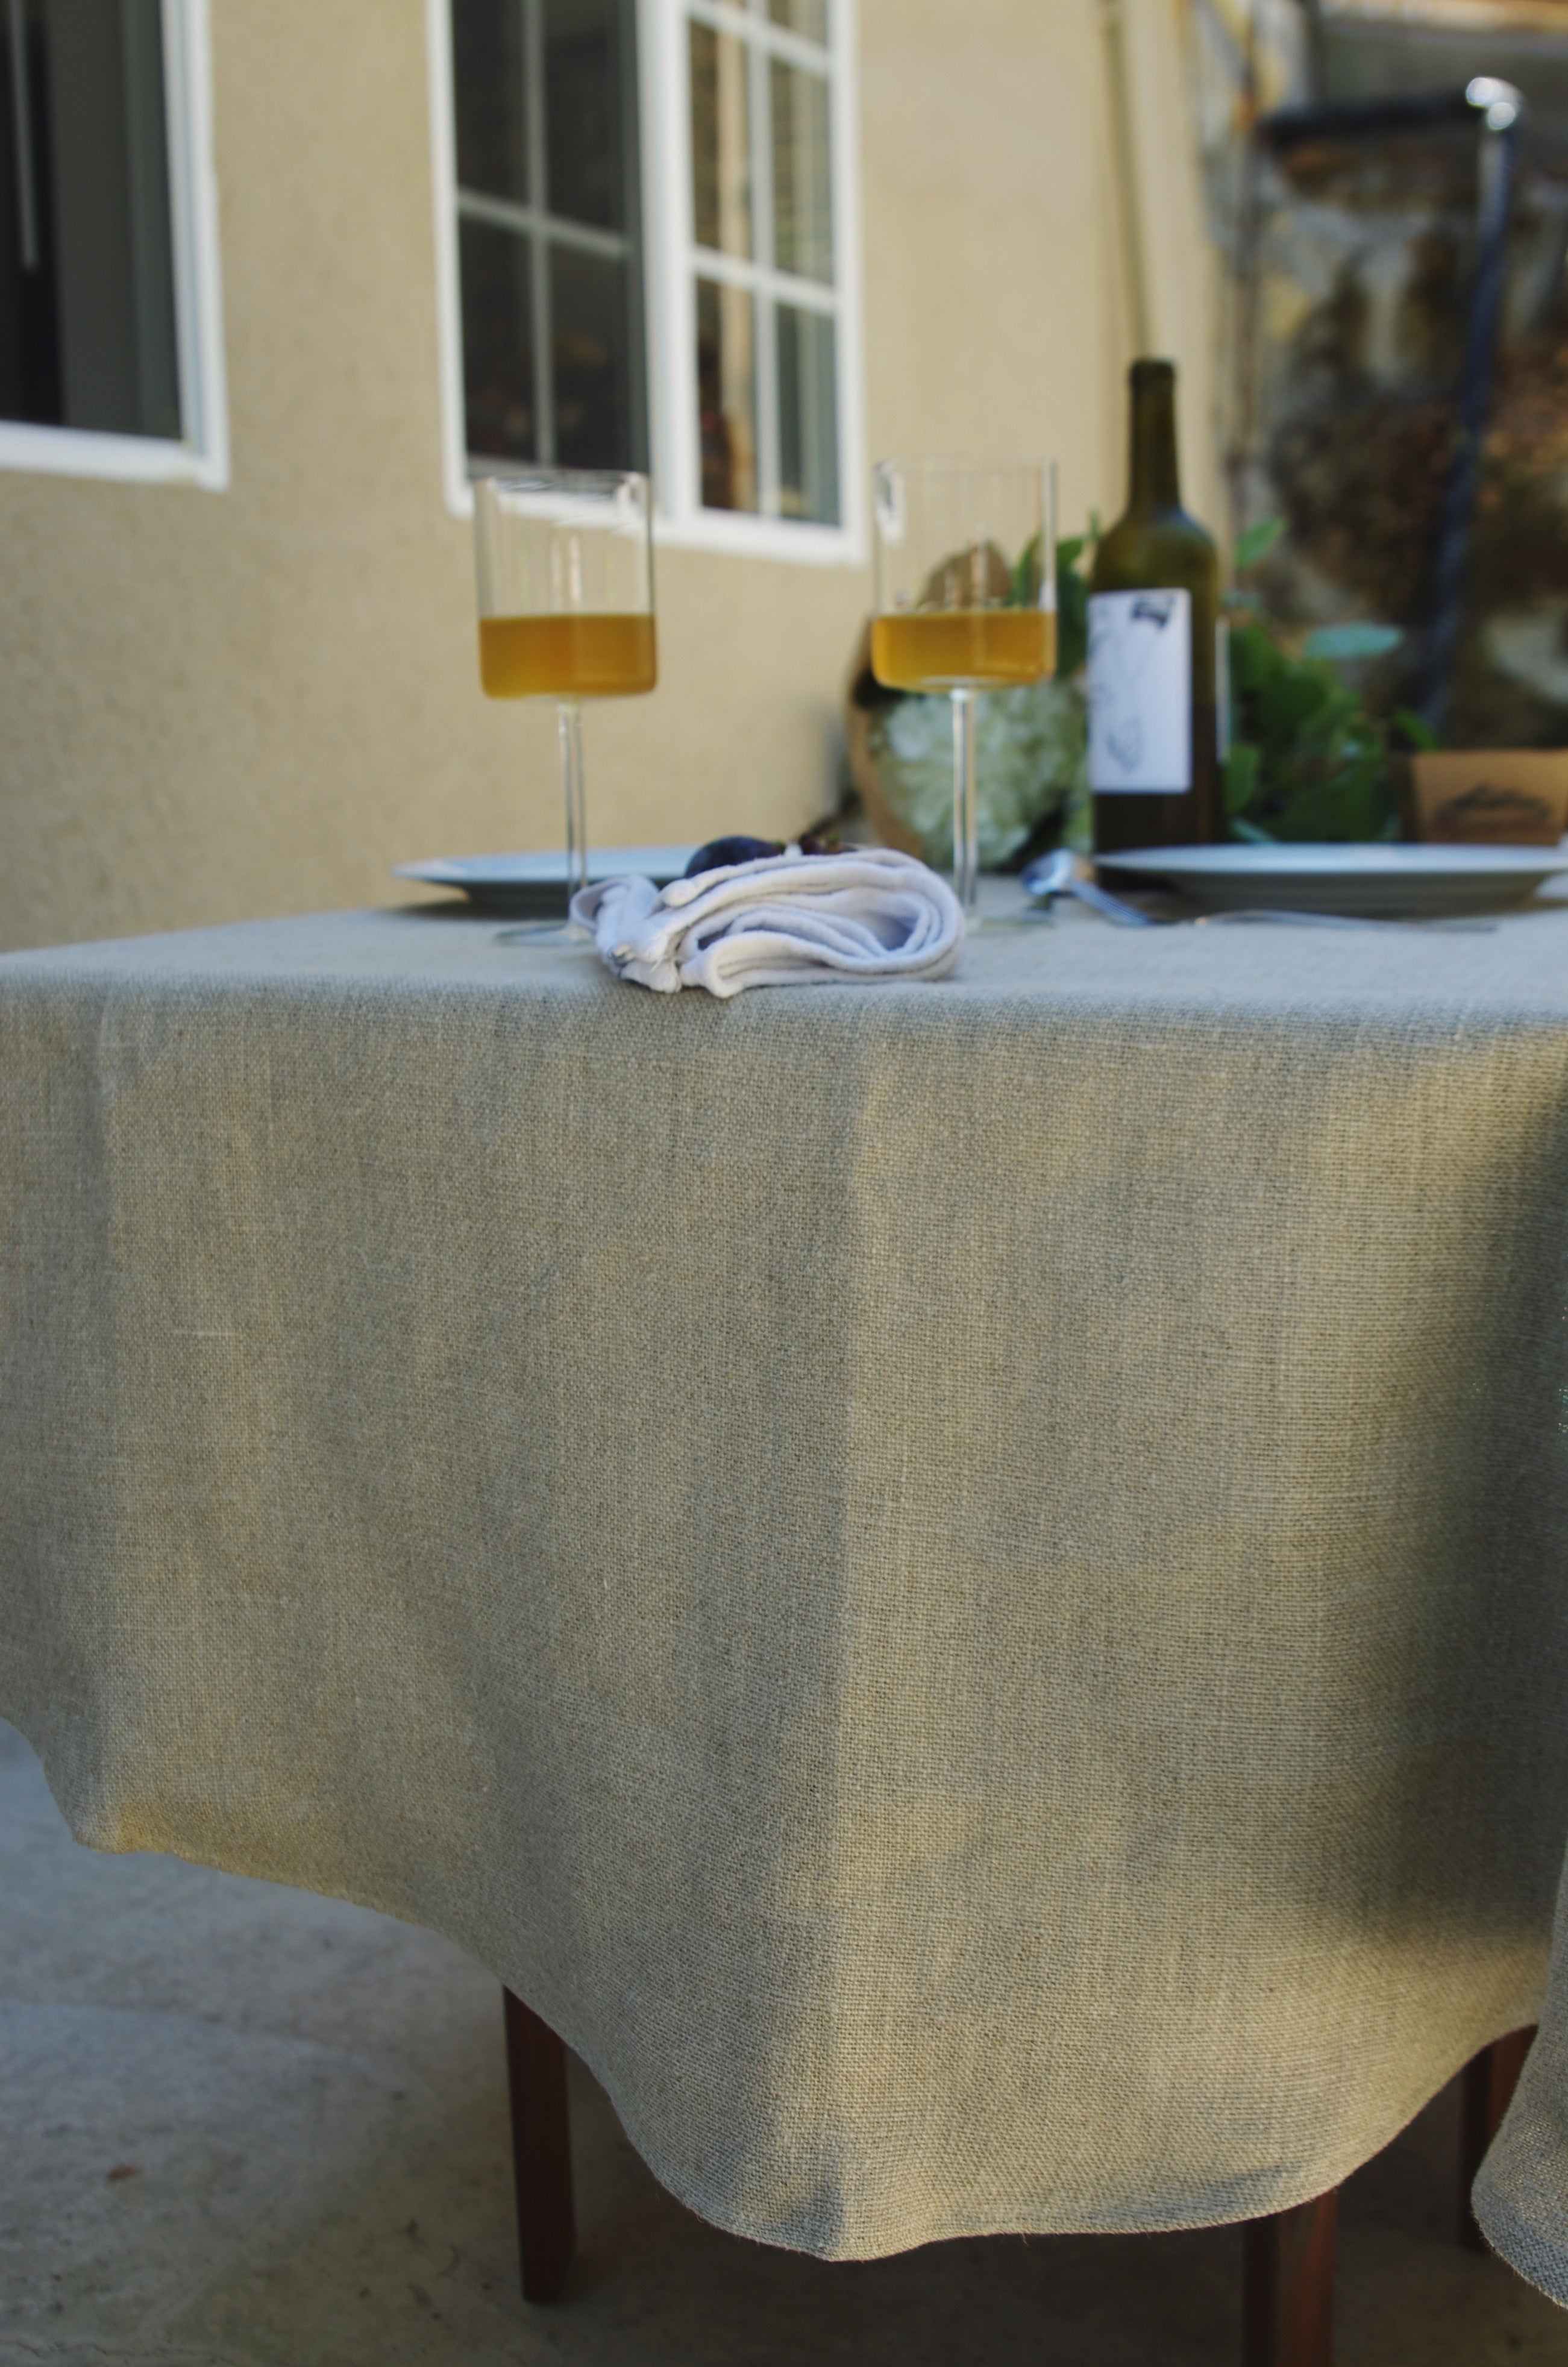 Thieffry Bagatelle Linen Round Tablecloth (67") Placemats Thieffry Brand_Thieffry Home_Decor New Arrivals Textiles_Tablecloths 7421-0003ThieffryBagatelleLinenRoundTablecloth67__1